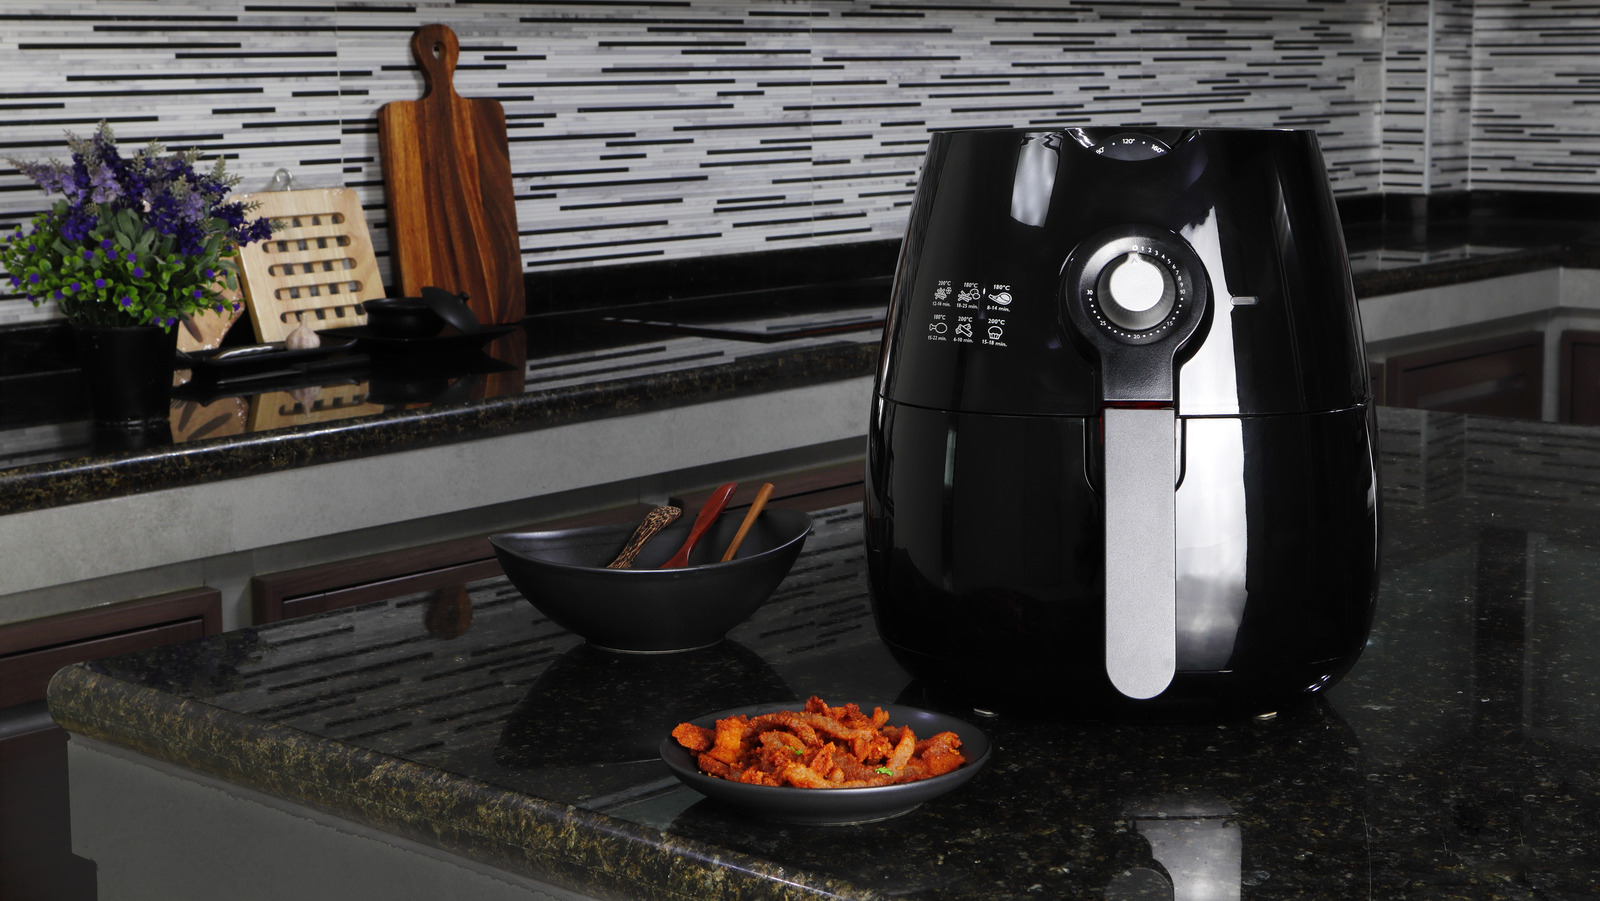 Black+Decker's big toaster oven air fries your food too. - CNET